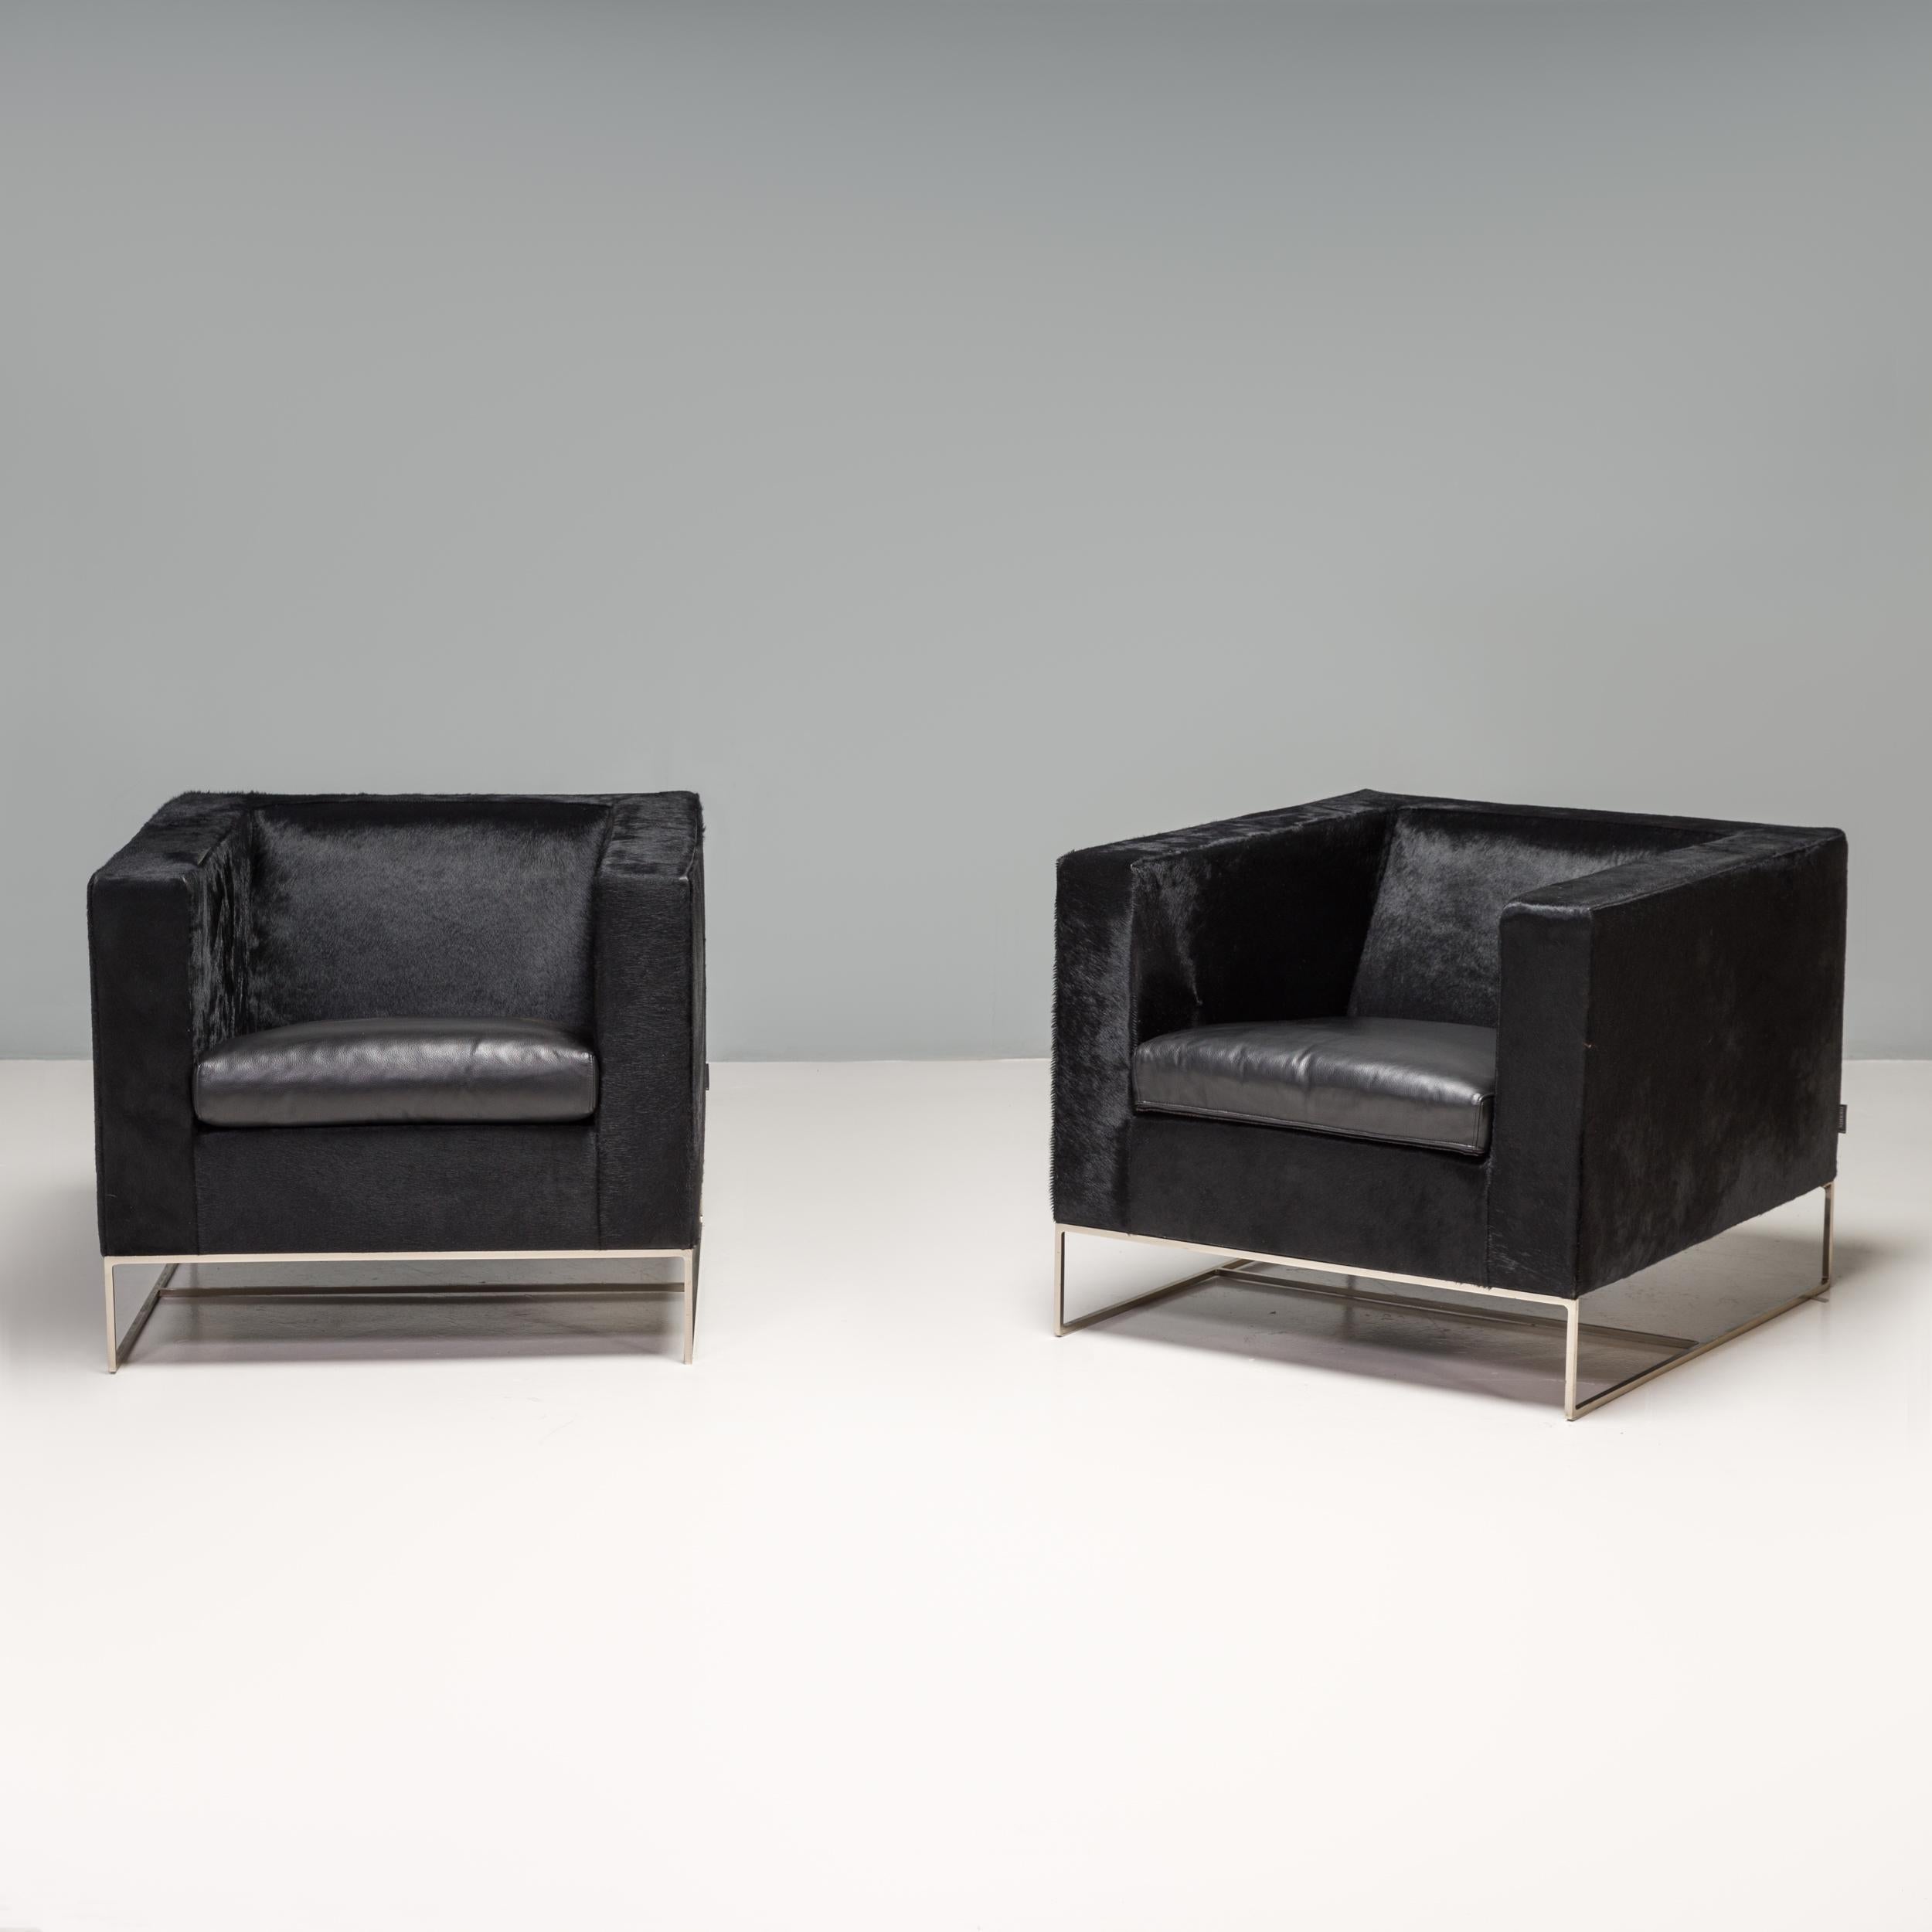 Designed by Rodolfo Dordoni for Minotti, the Klee armchair is a fantastic example of elegant modern Italian design.

The chairs have a bold cube silhouette, contrasted by a sleek, angular base constructed from hand-worked metal in a polished